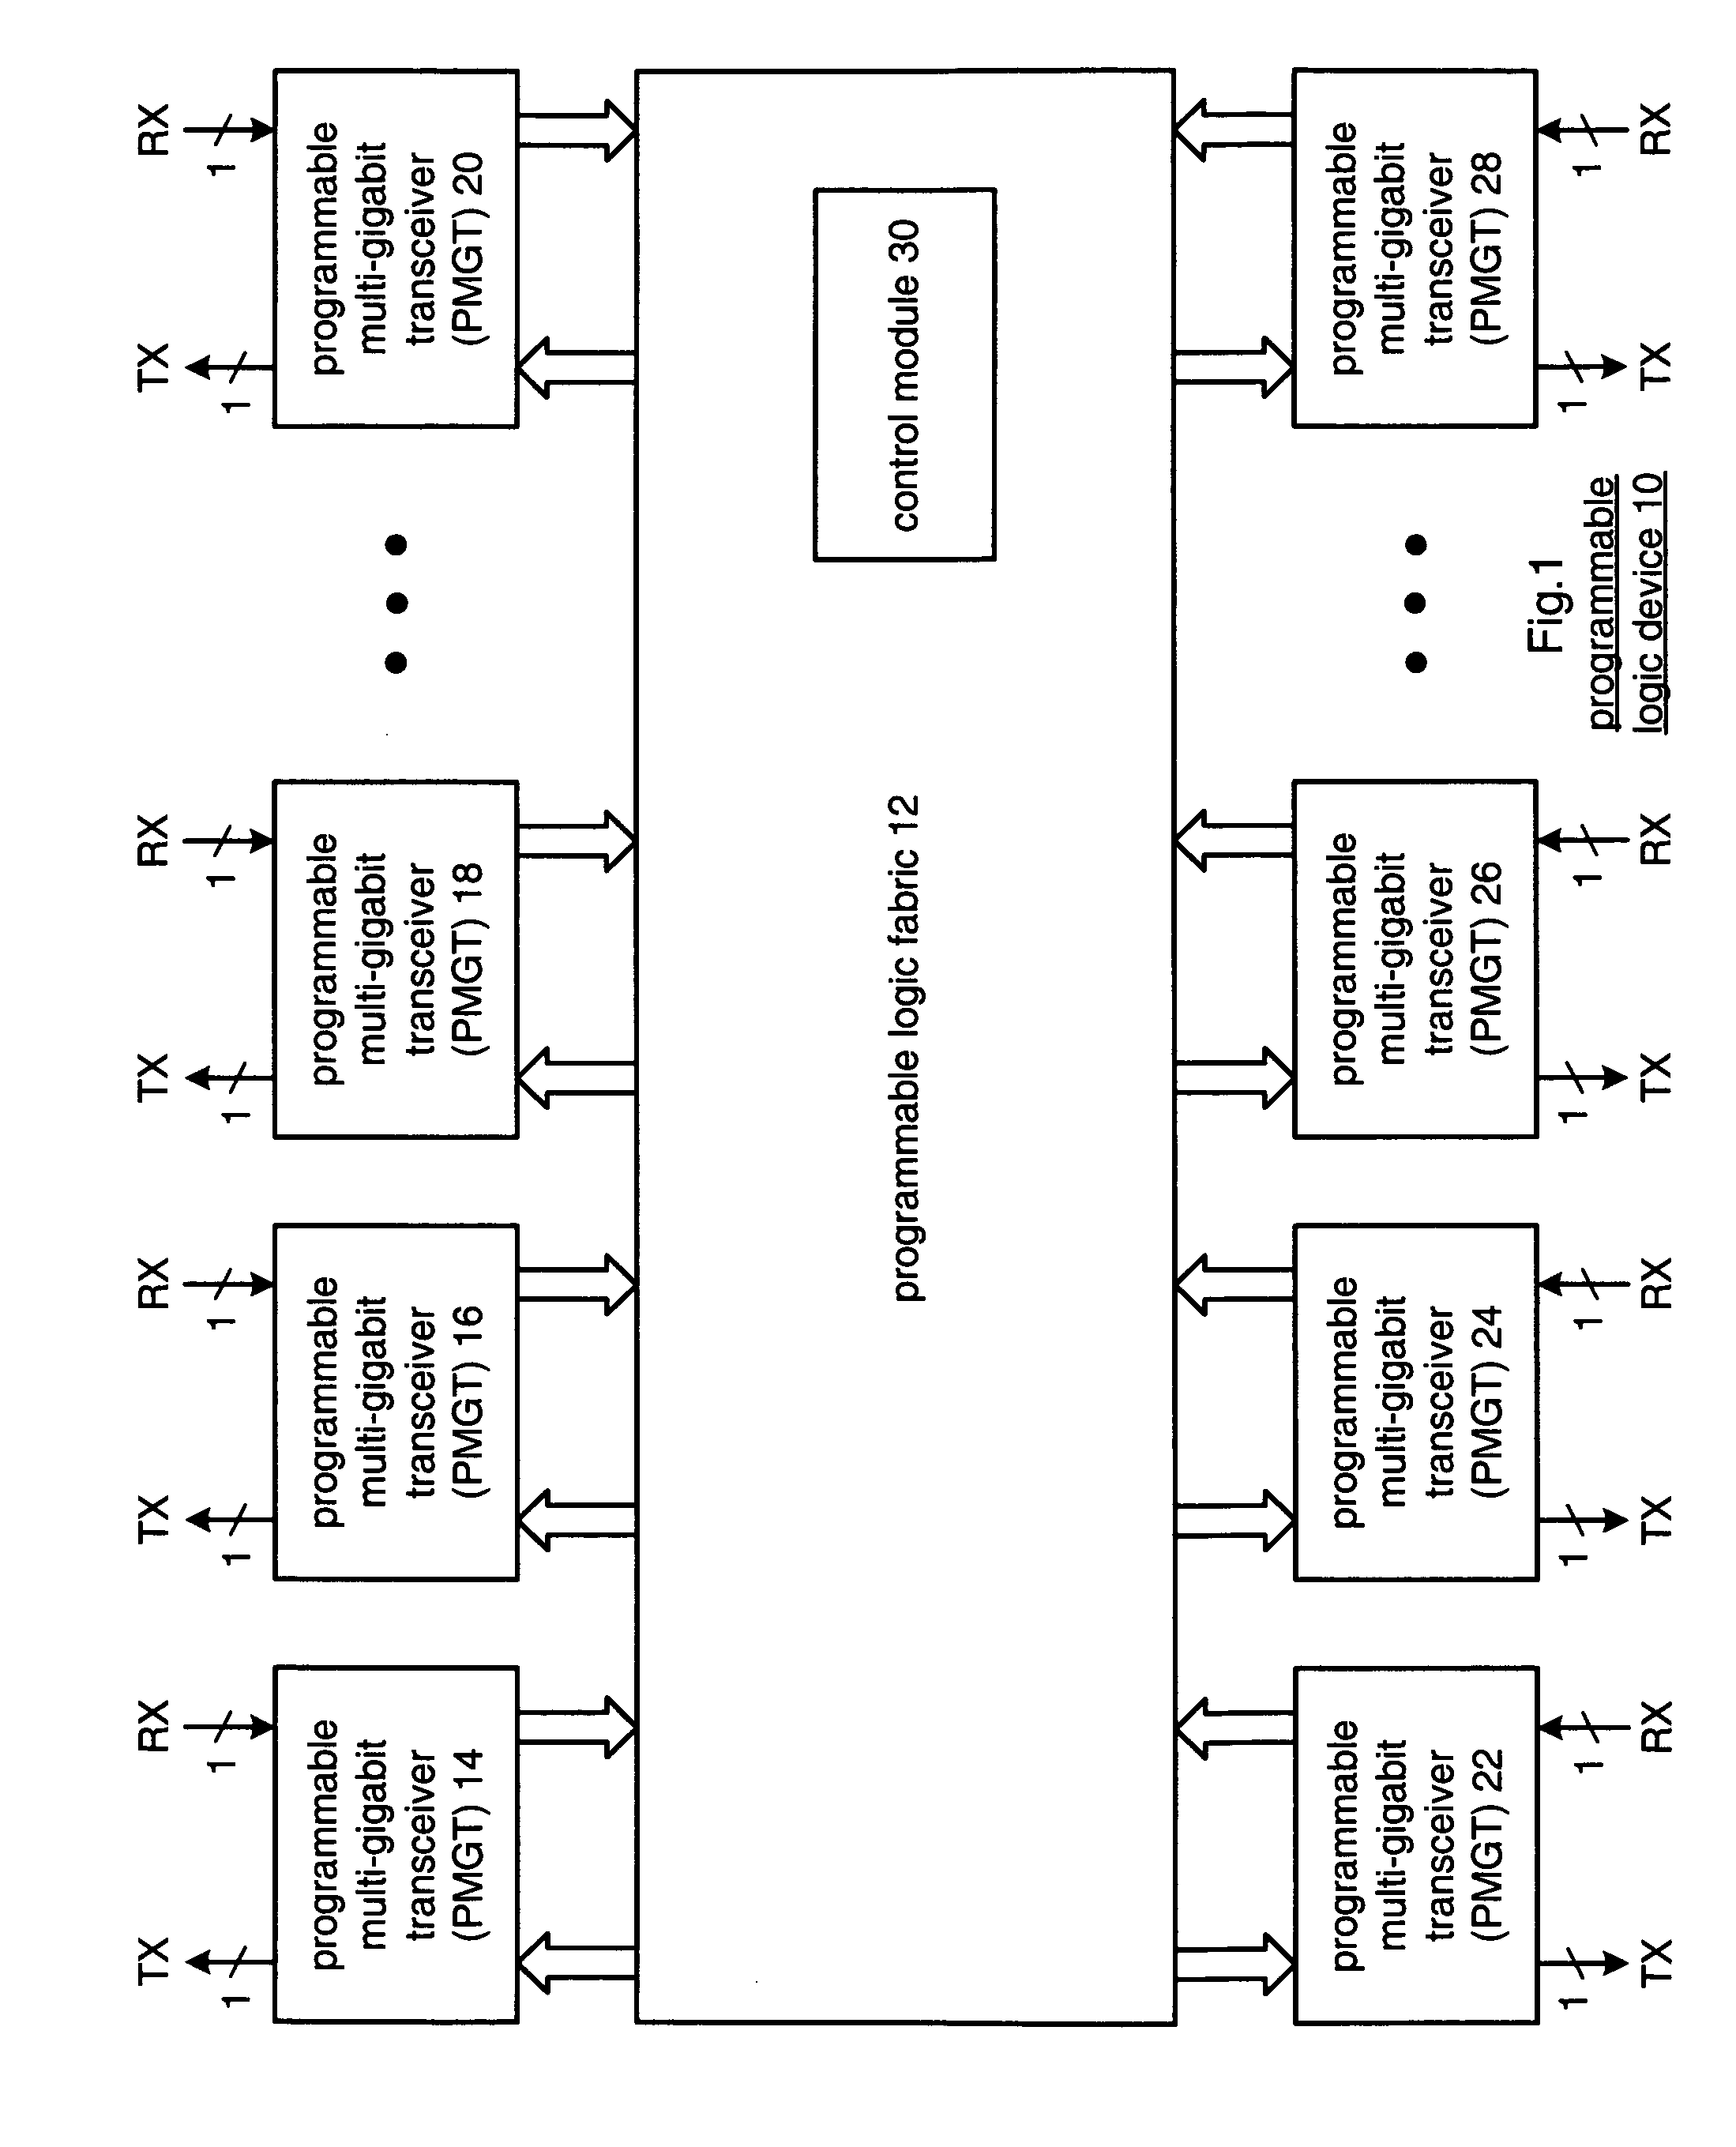 Multi-stage phase detector